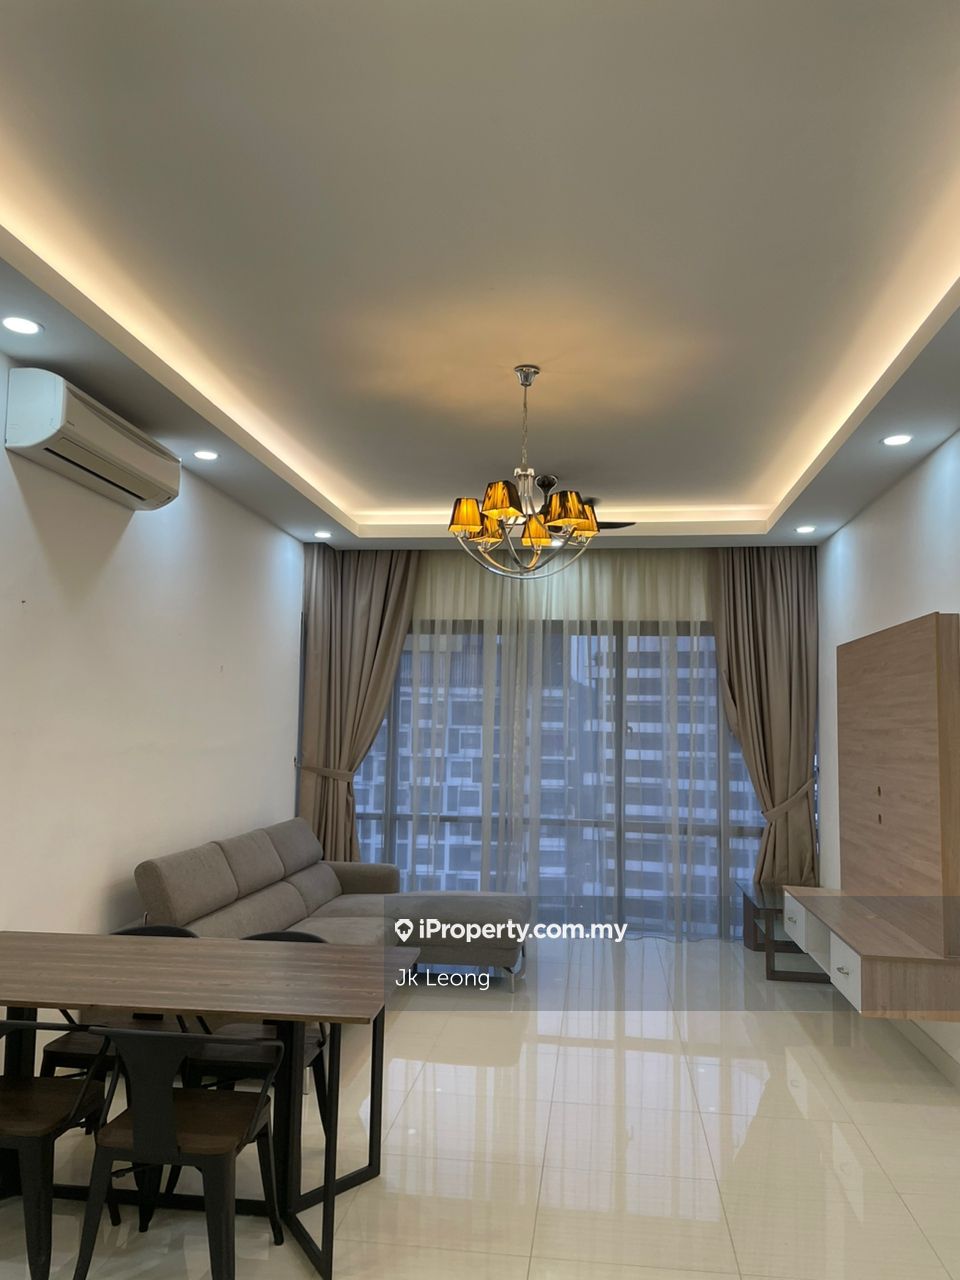 Reflection Residences Serviced Residence 3 bedrooms for rent in Mutiara ...